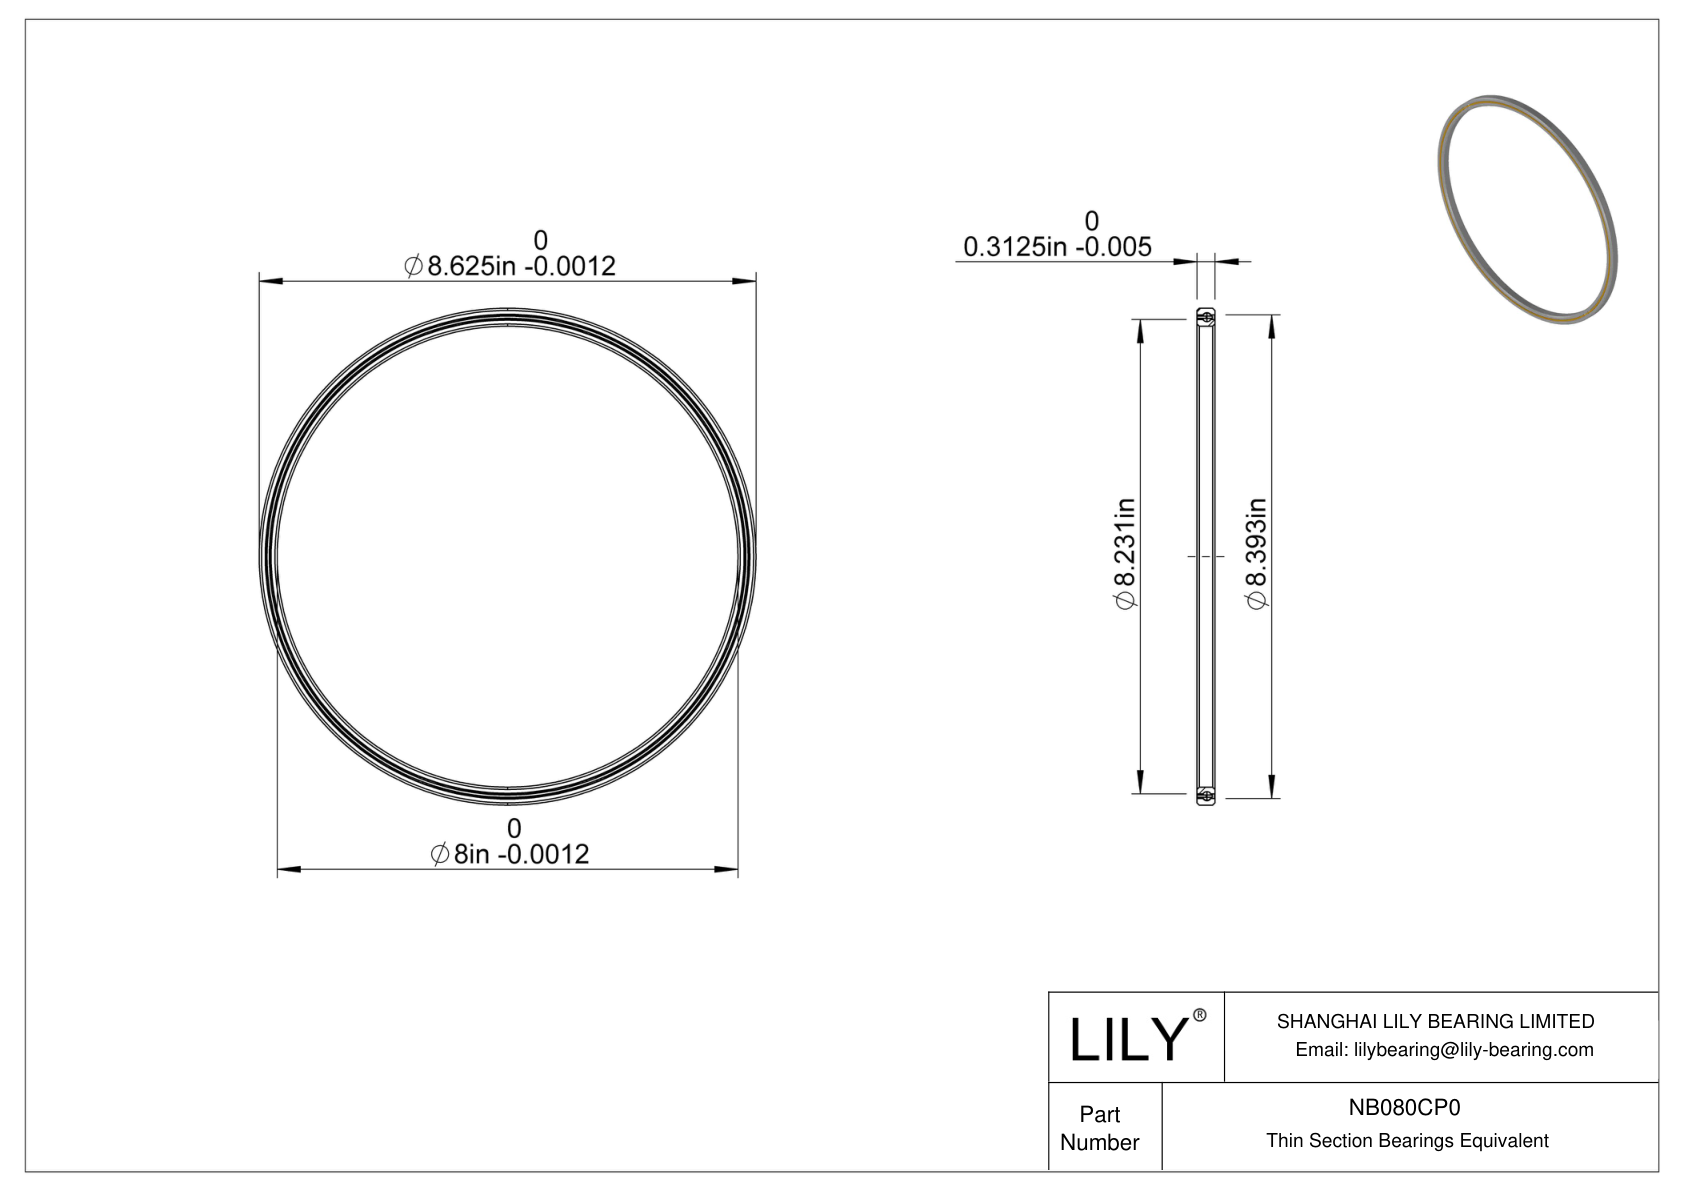 NB080CP0 Constant Section (CS) Bearings cad drawing